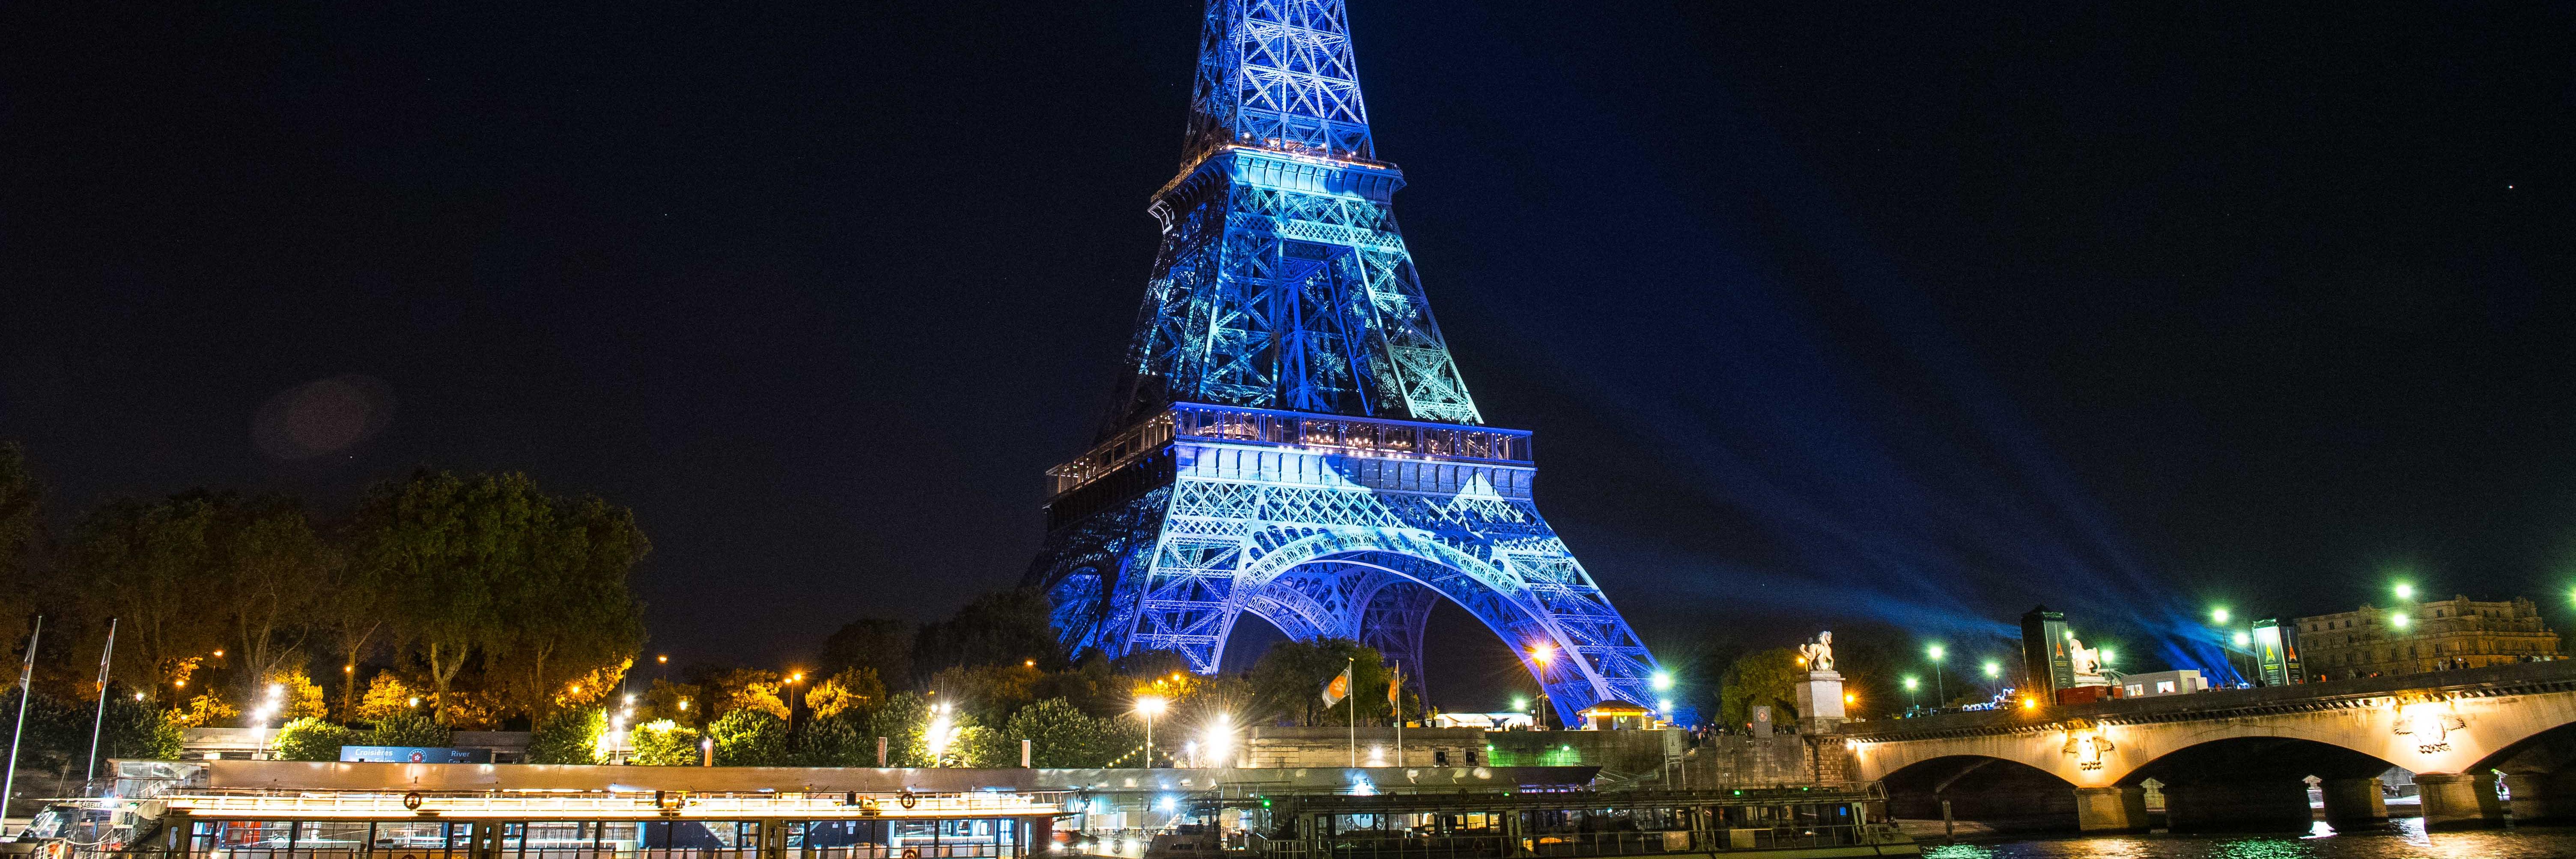 photo: the Eiffel Tower light show as part of the Japonismes 2018 celebrations